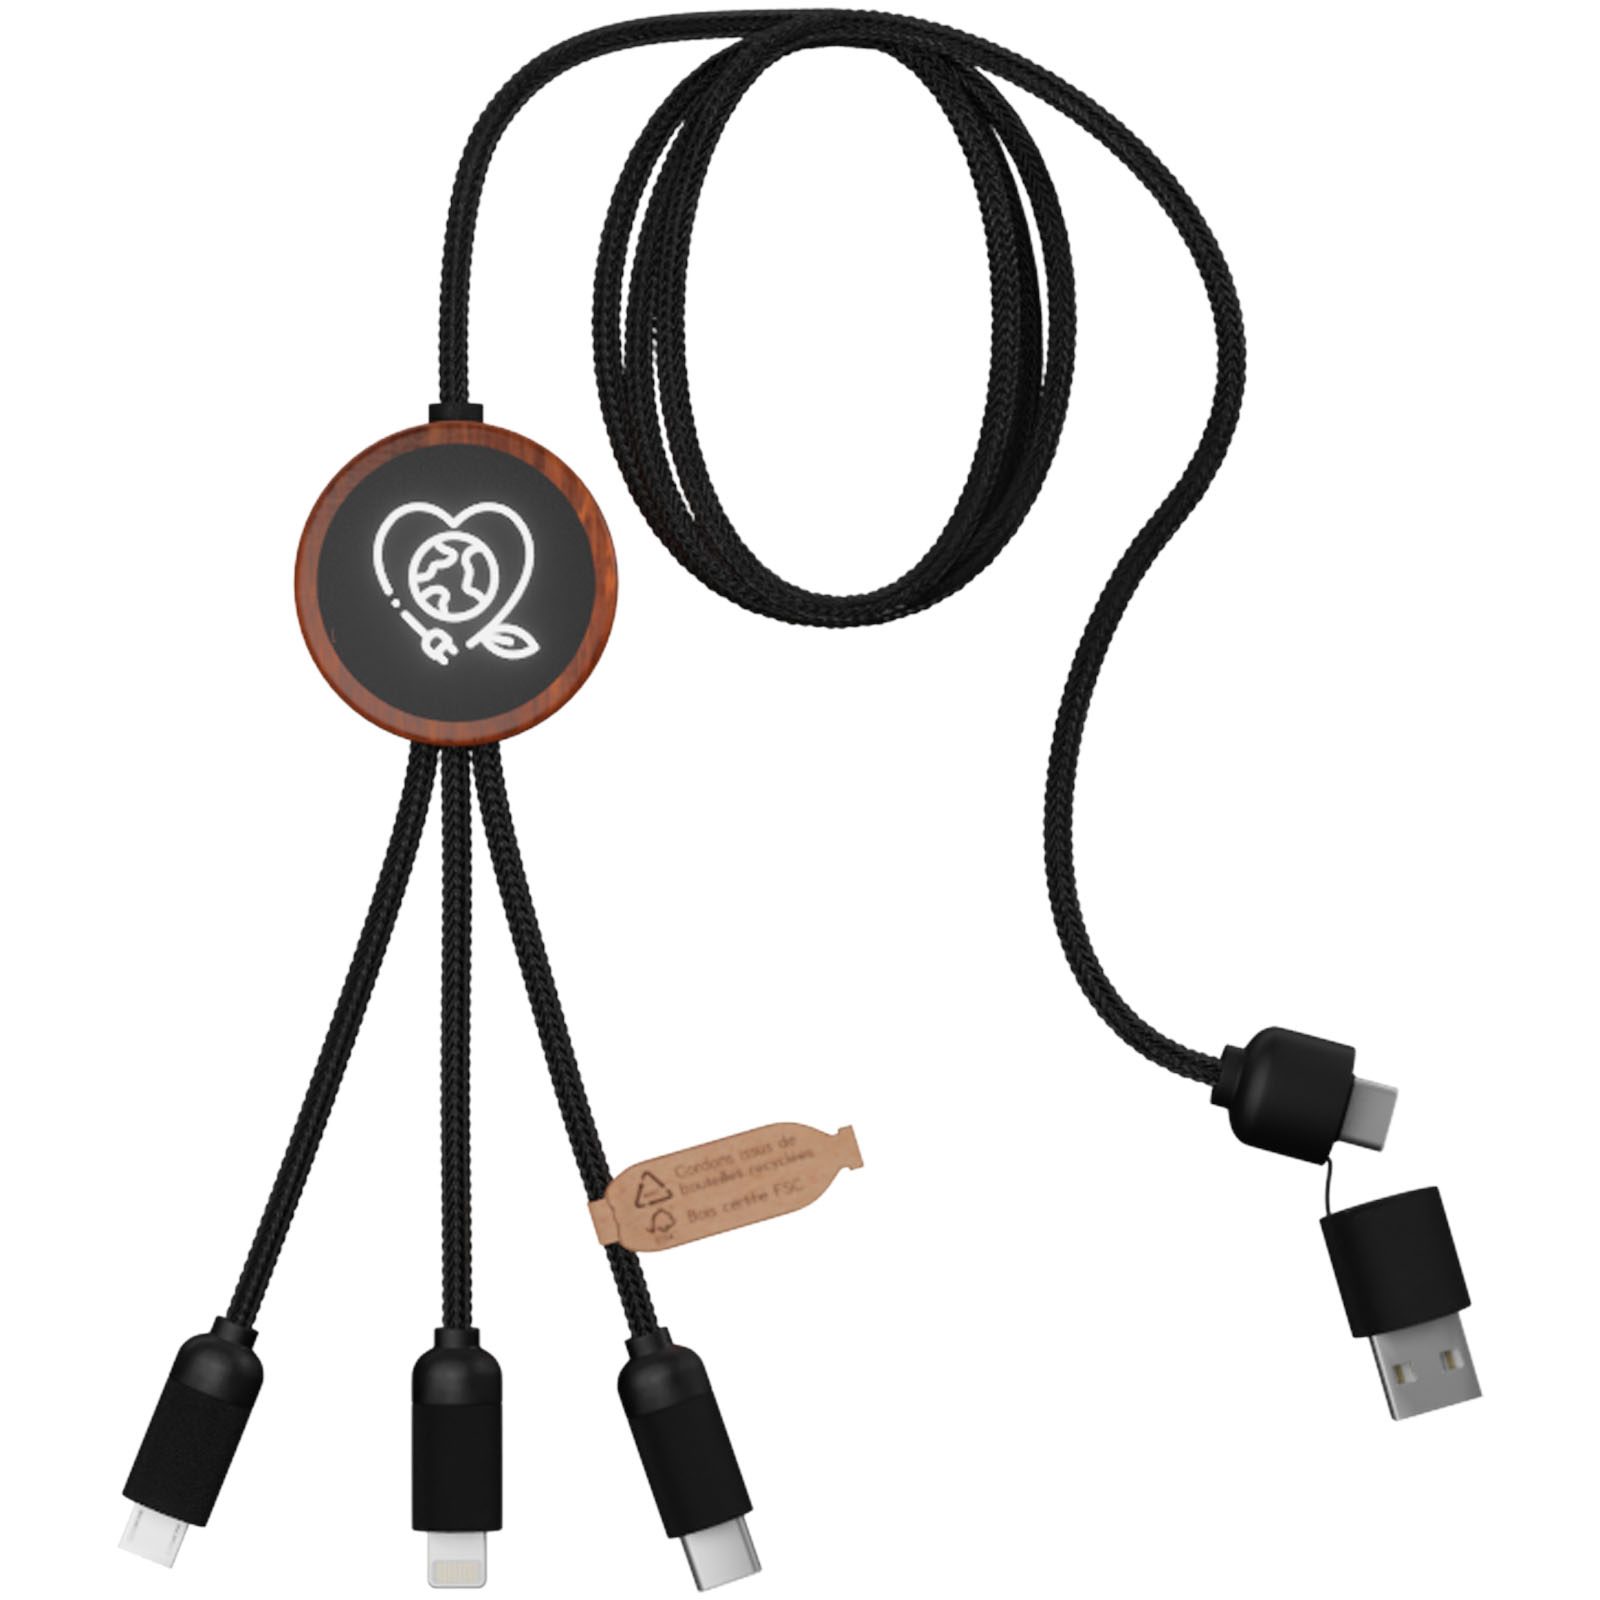 5-in-1 Universal Charging Cable by EcoCharge - Ovingdean - Everthorpe